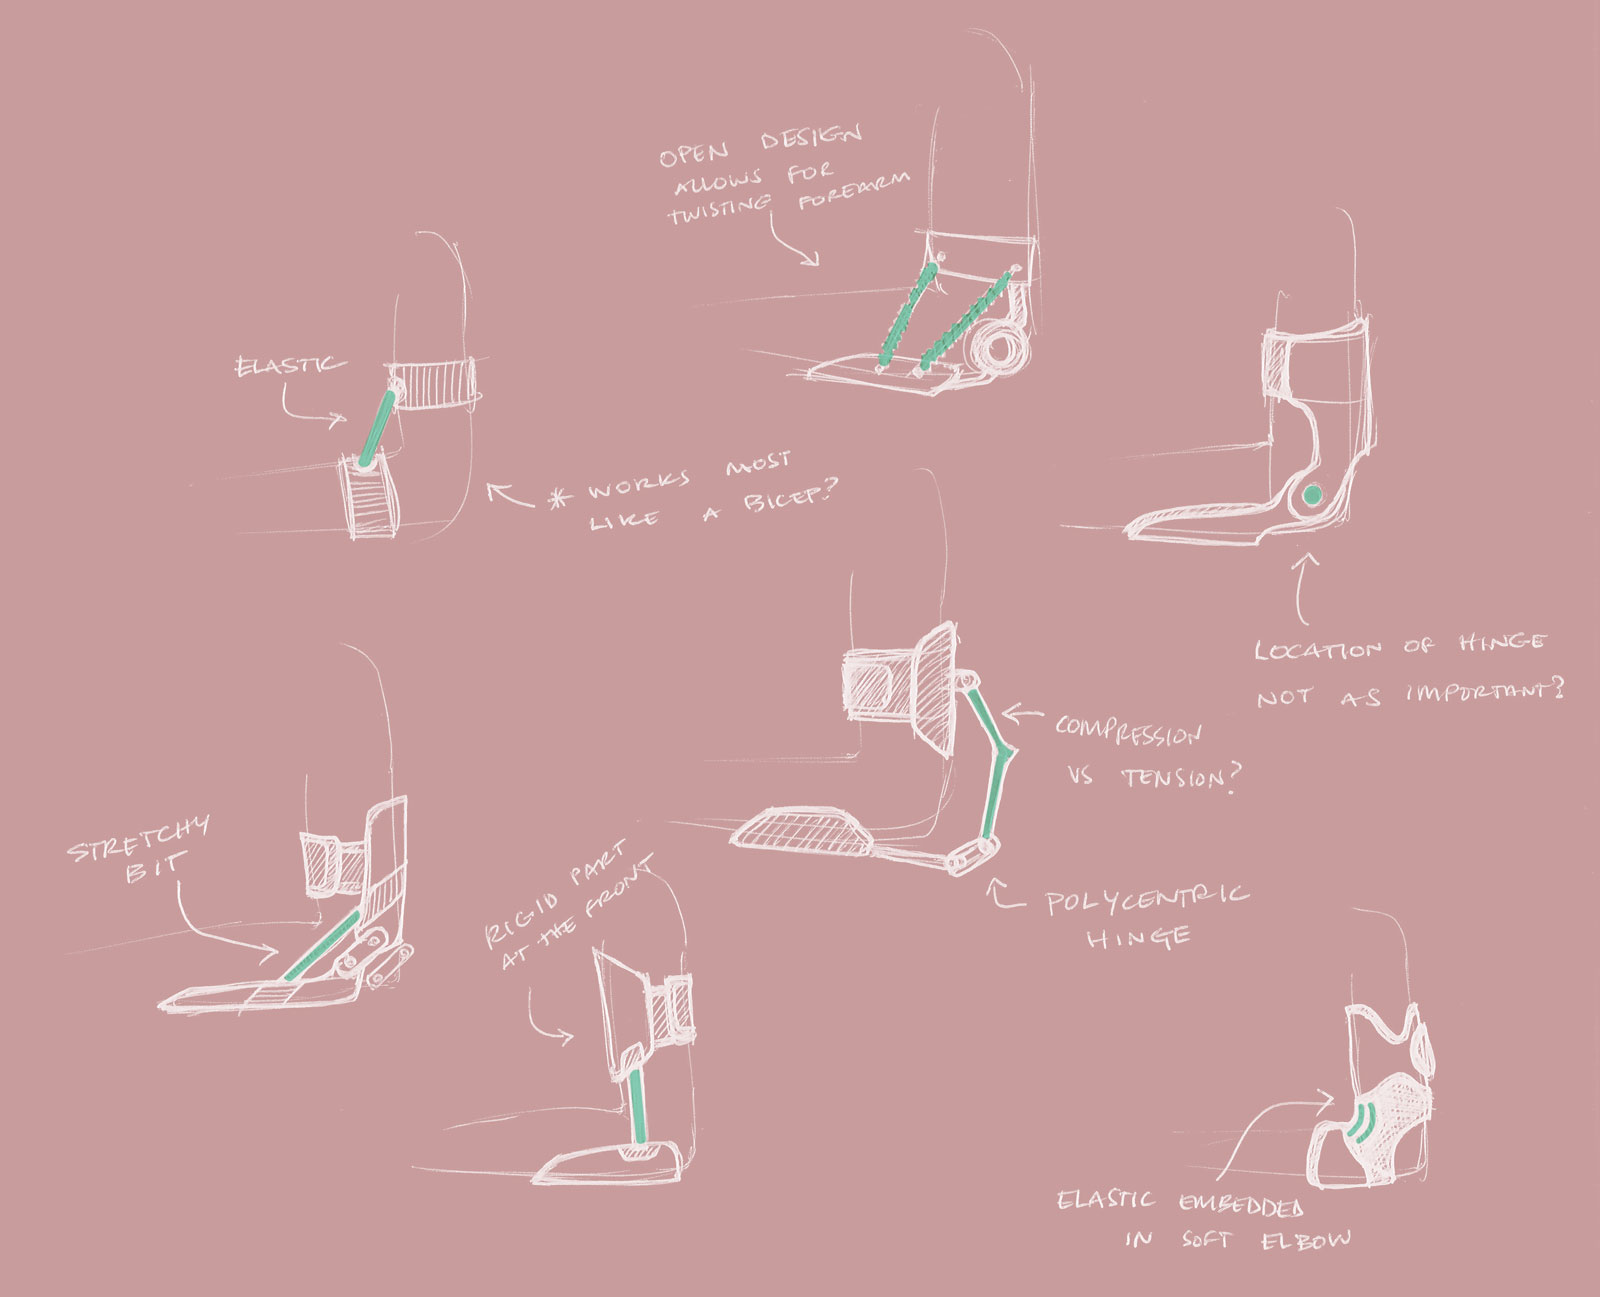 Sketch explorations of an elbow brace